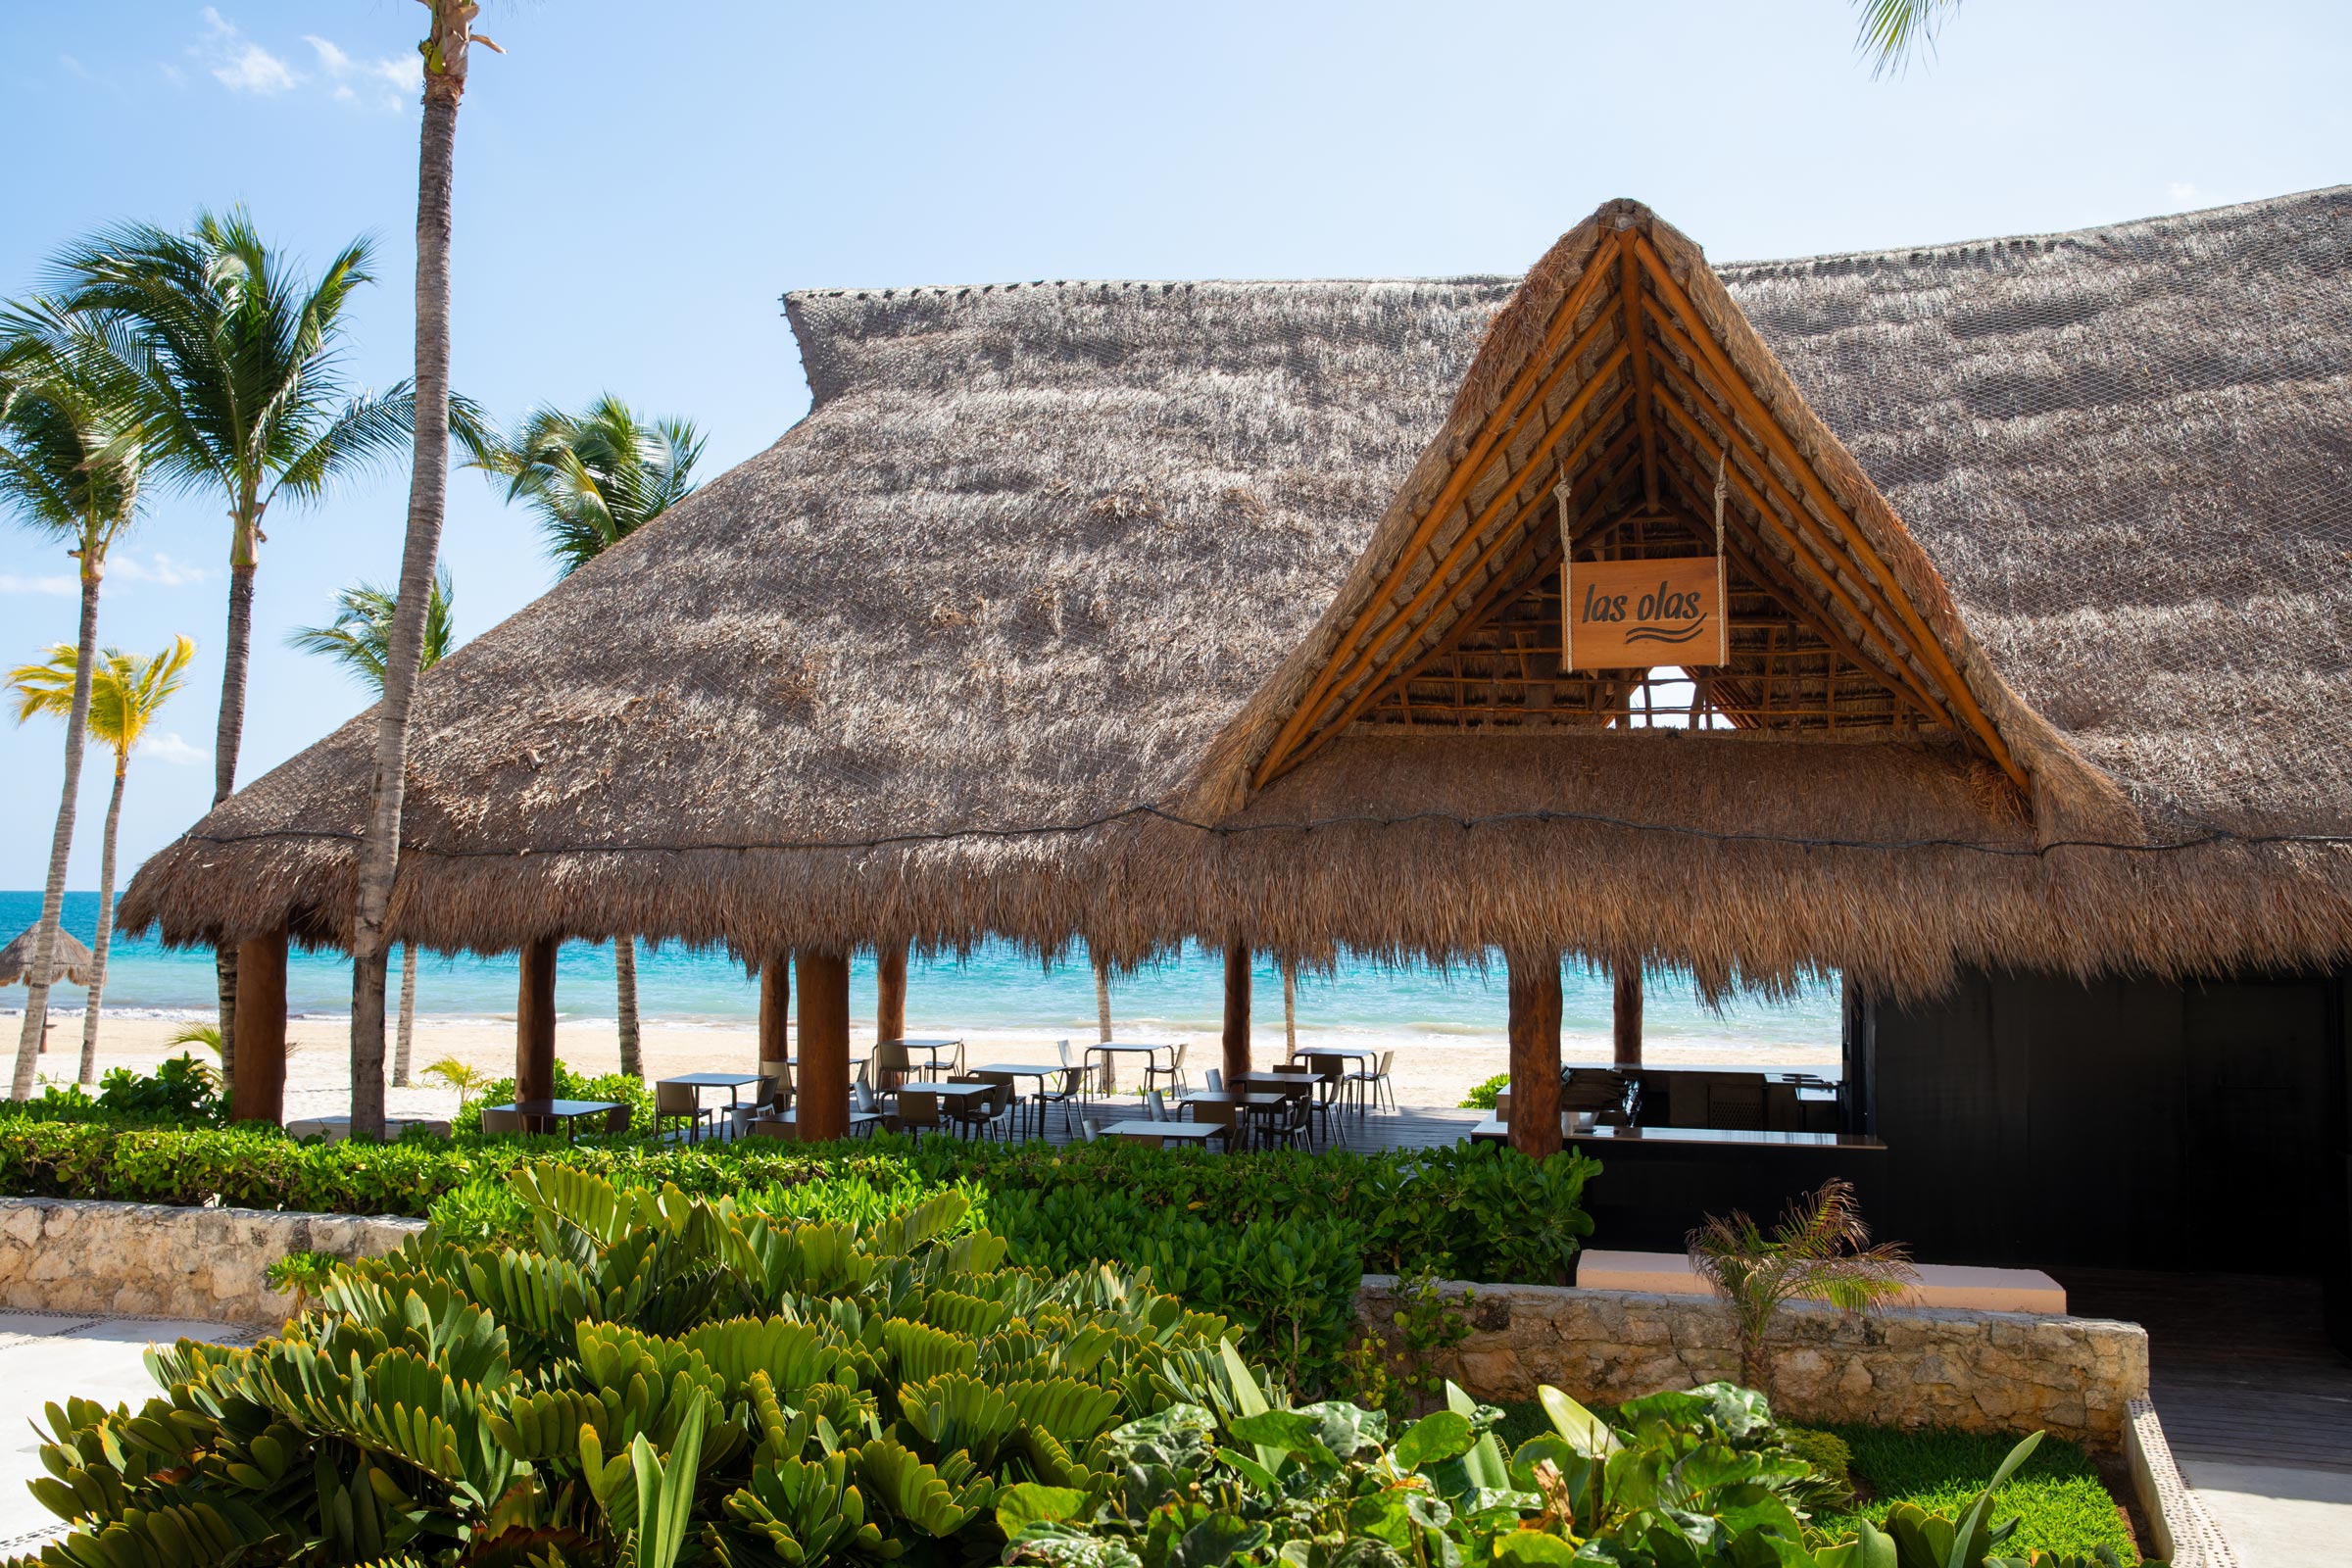 Las Olas Restaurant at Excellence Riviera Cancun enjoy delicious meals on the sand